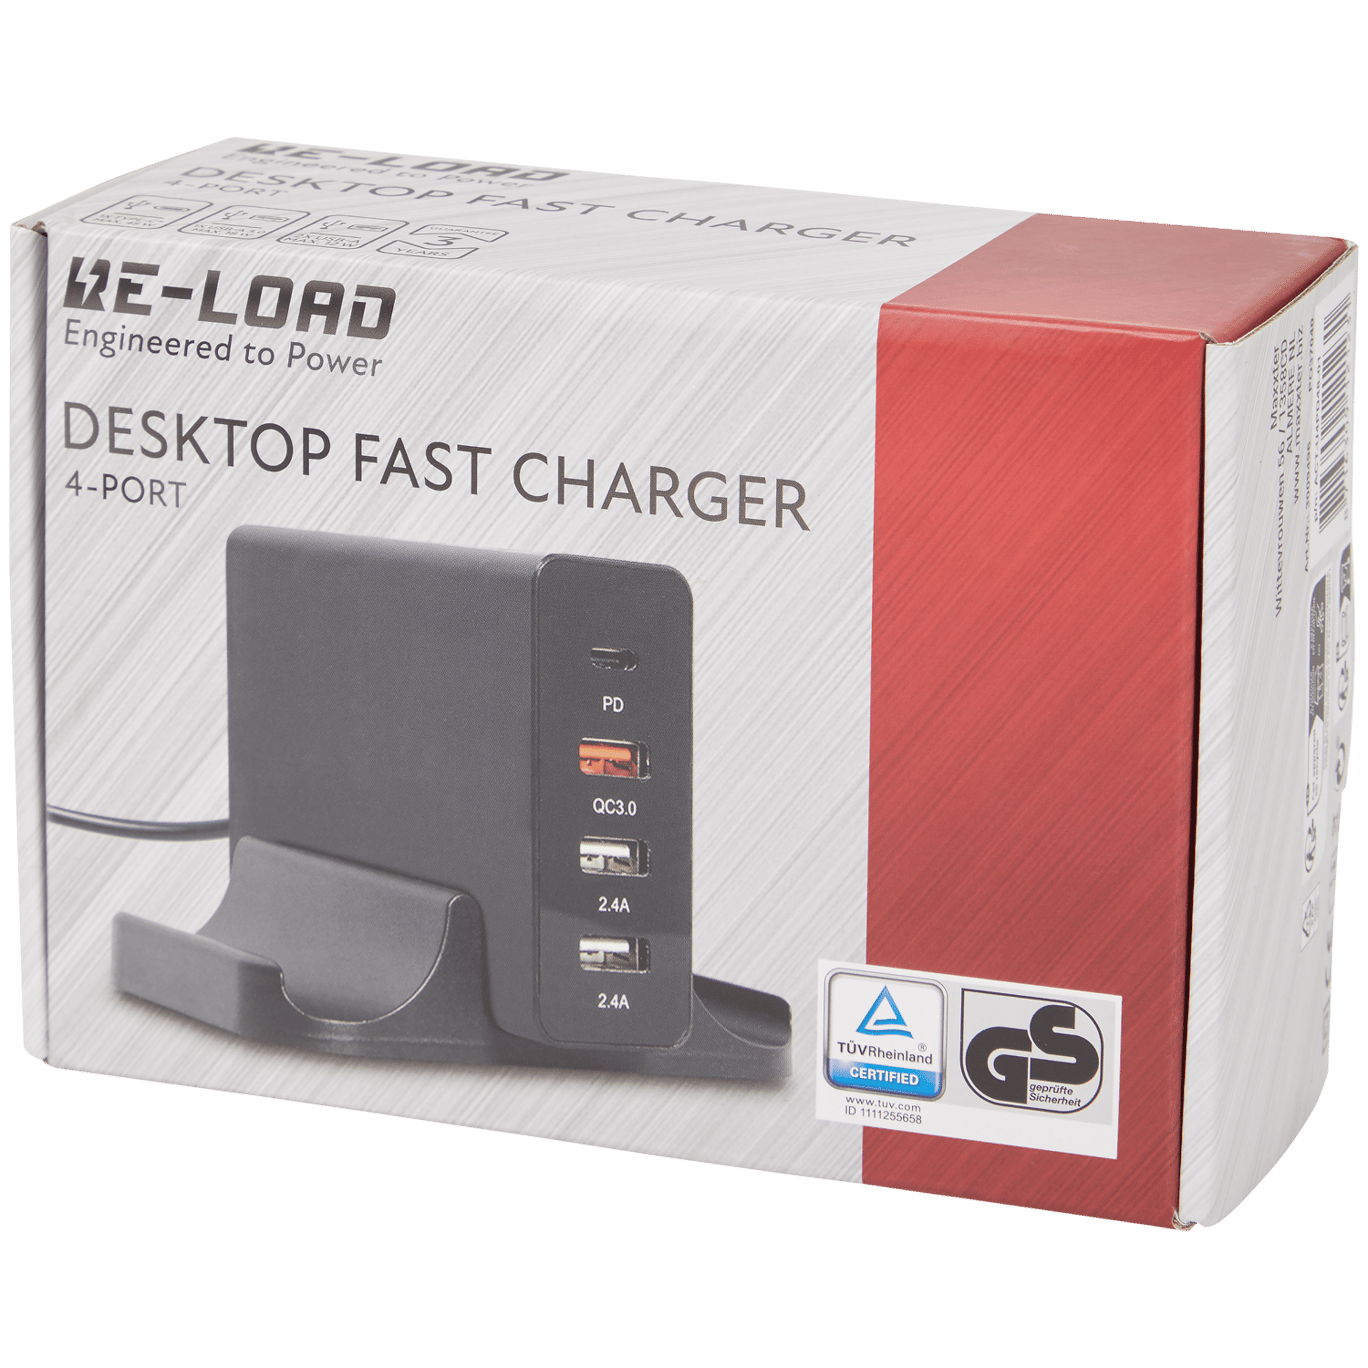 Re-load draadloze oplader | Action.com